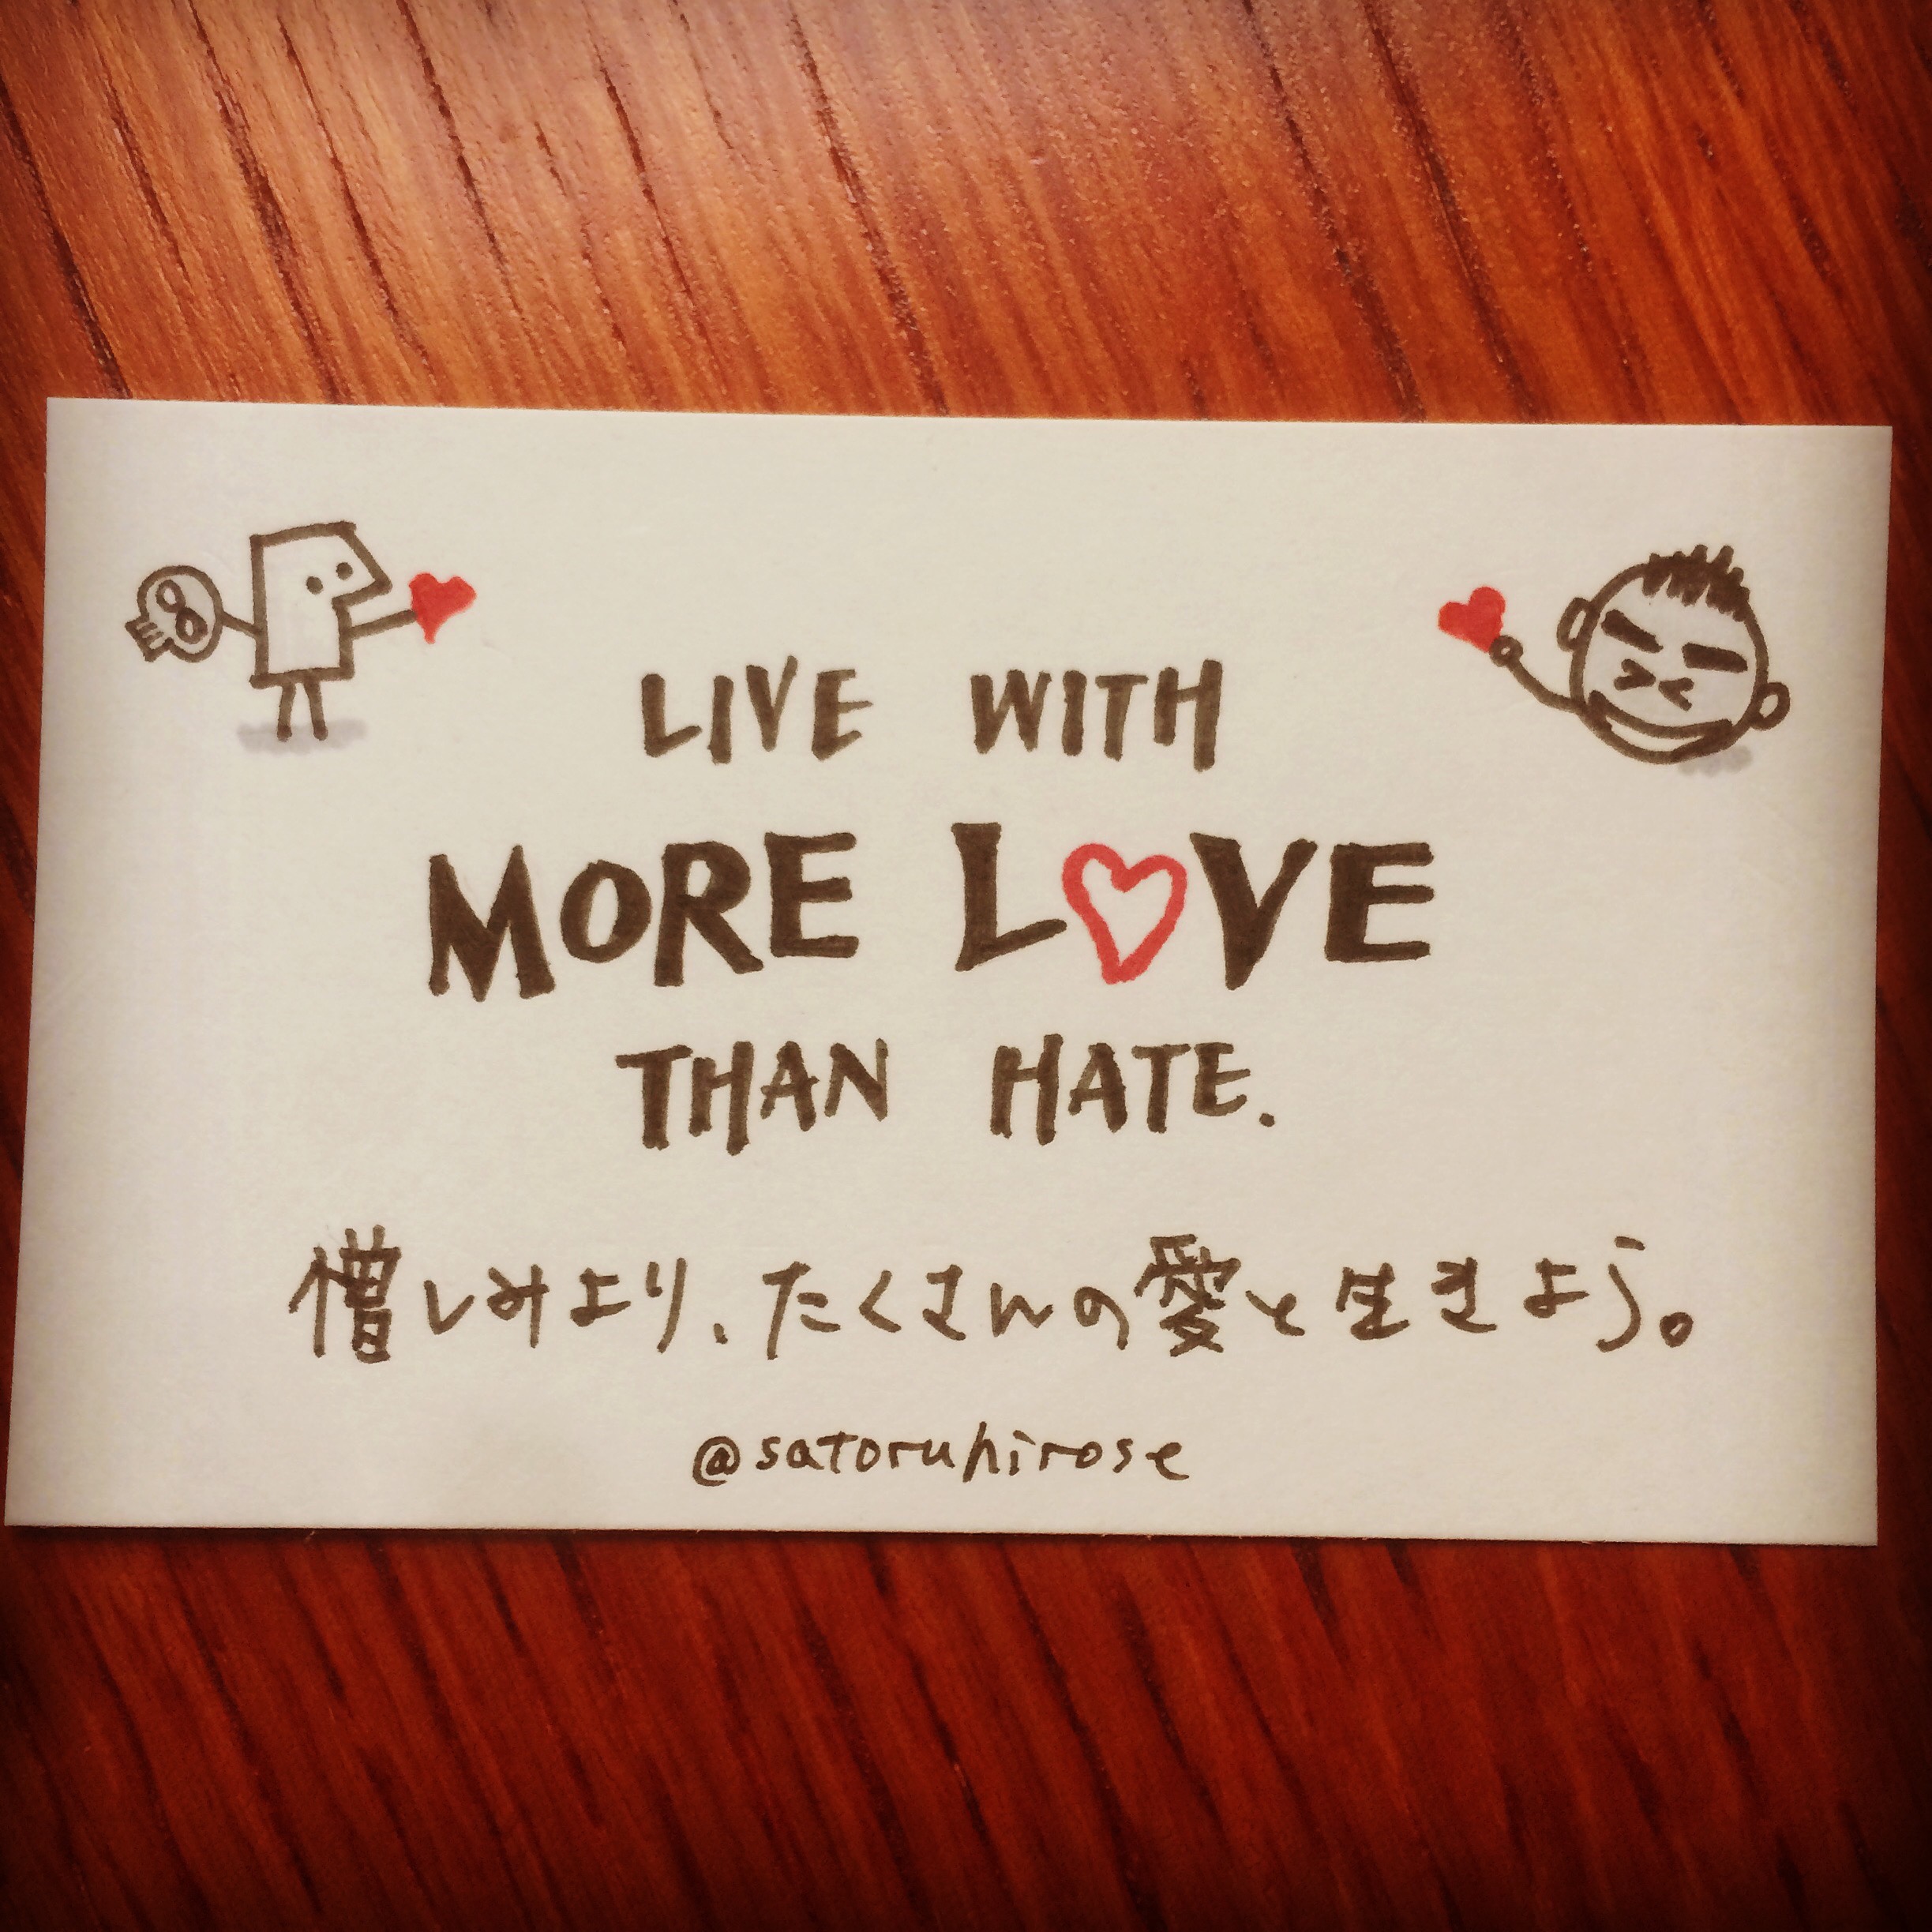 Live with more love than hate.